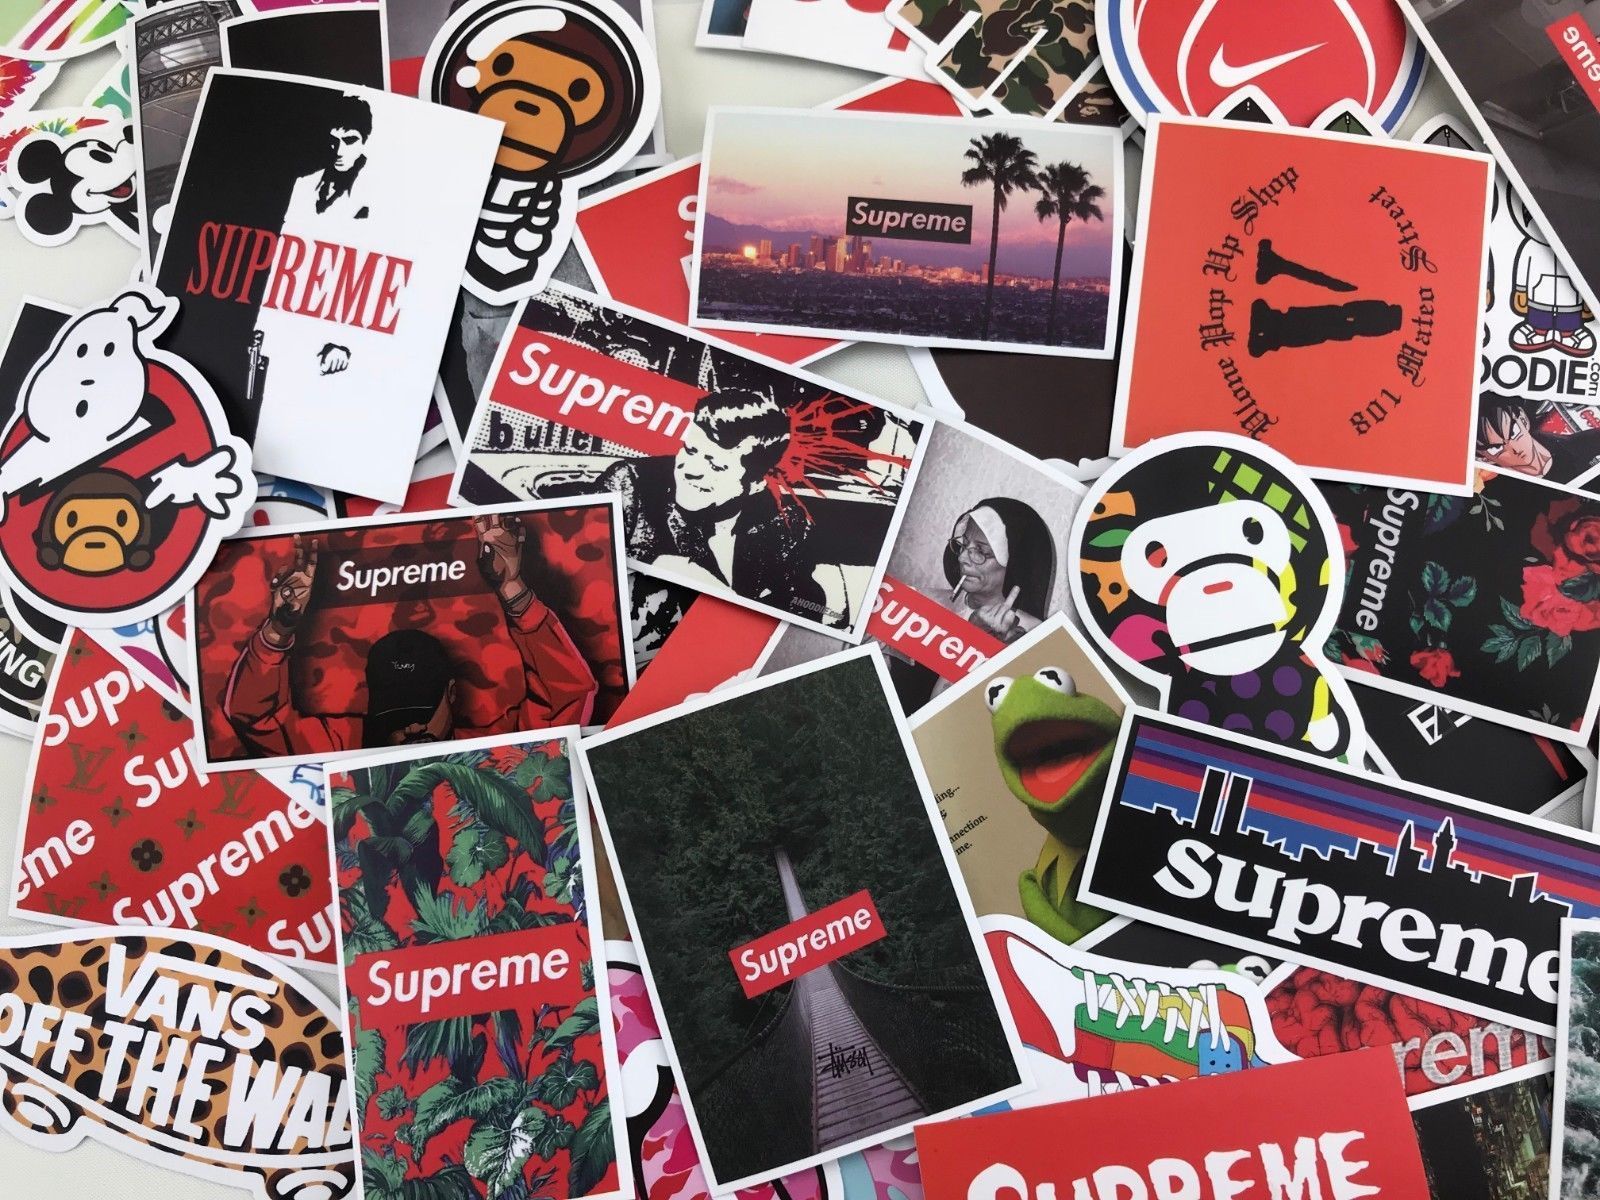 Supreme Stickers Area Rug – Hyped Art